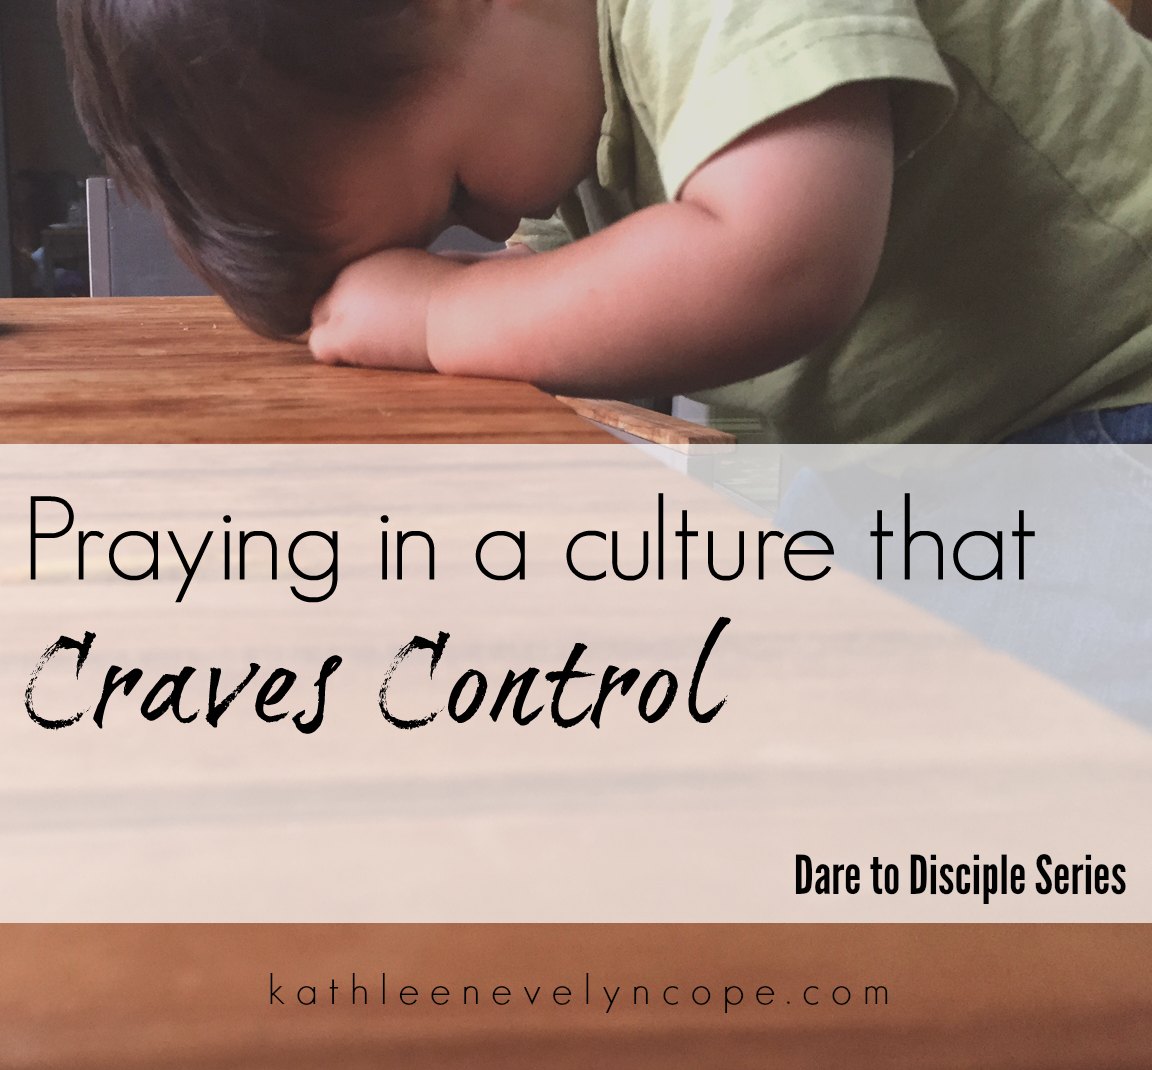 Praying in a culture that craves control